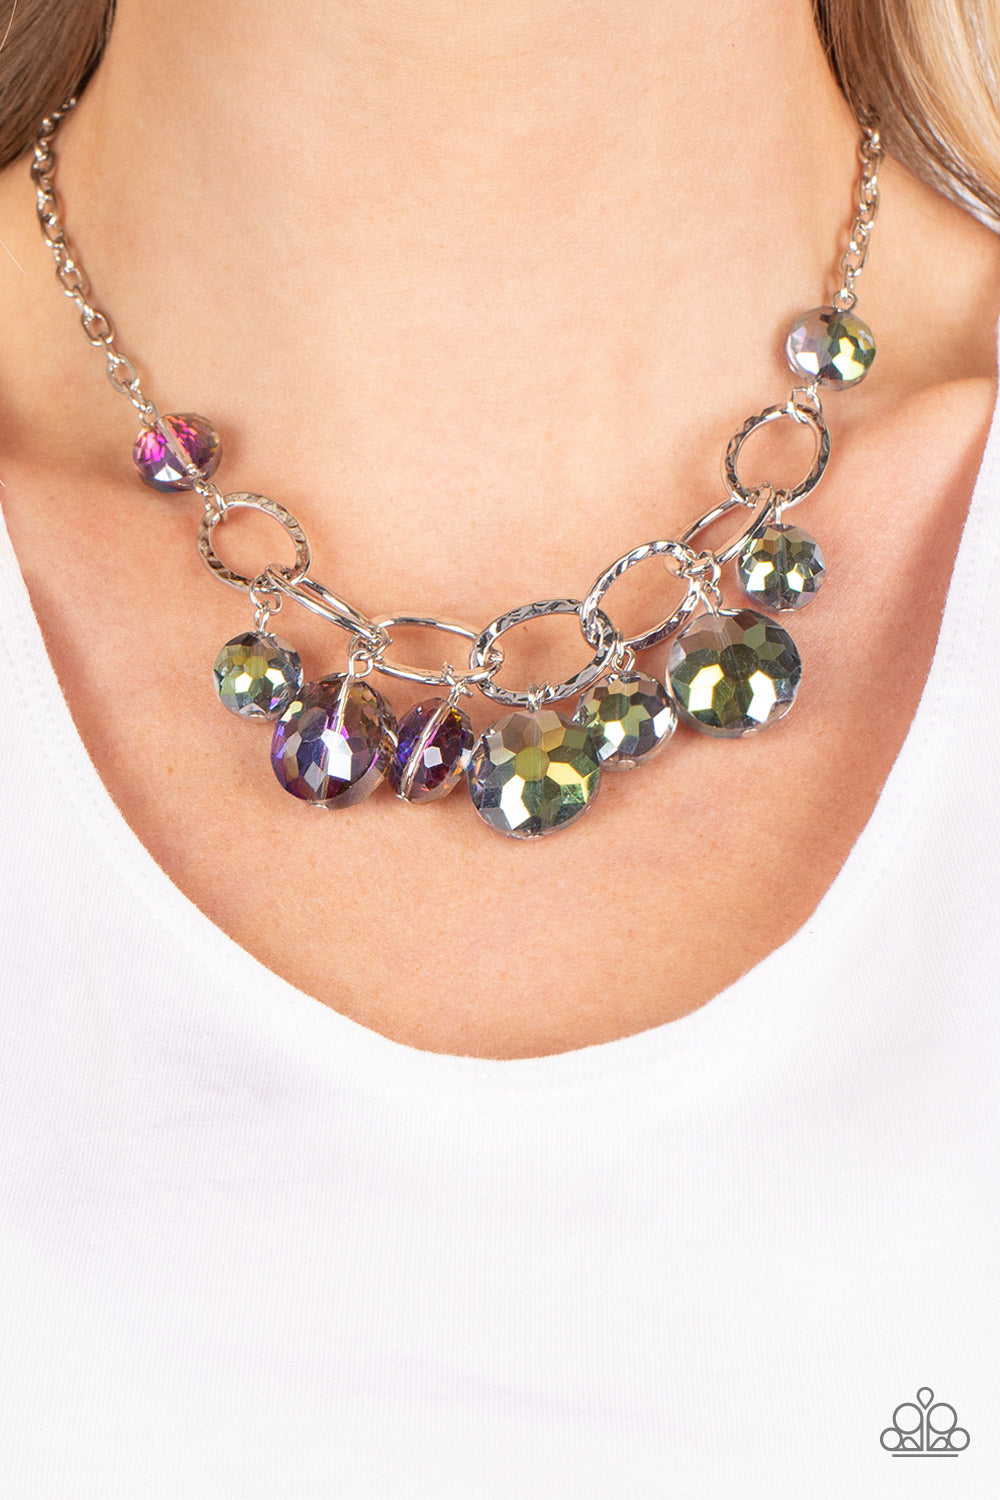 The Right To Remain Sparkly - Multi Necklace – Erin's $5 Splurge